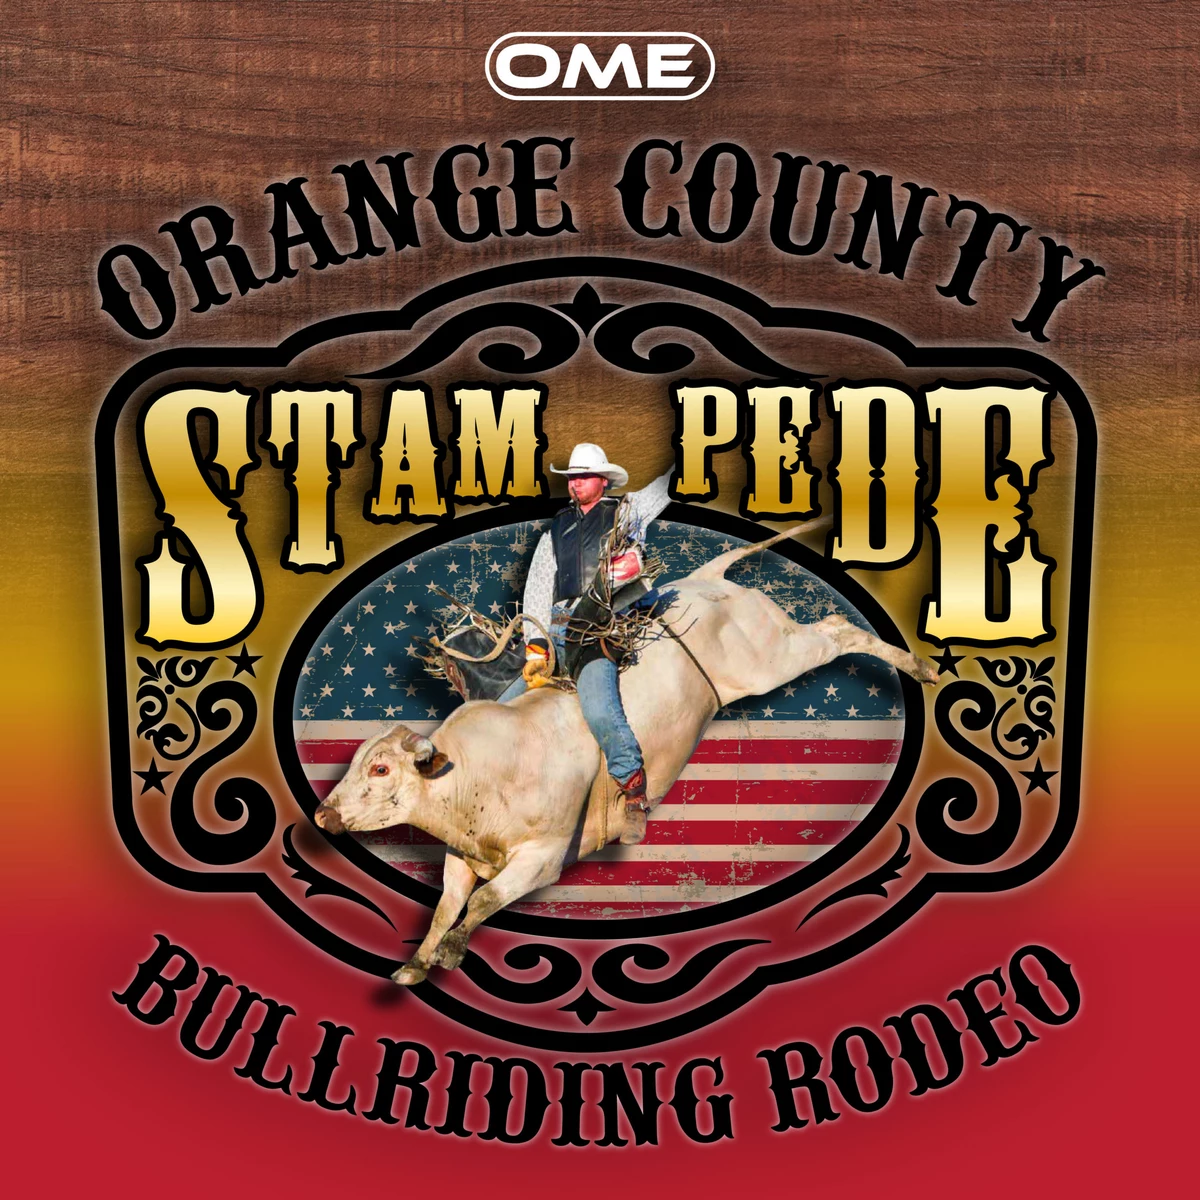 Enter To Win Tickets to the Orange County Stampede Bullriding Rodeo